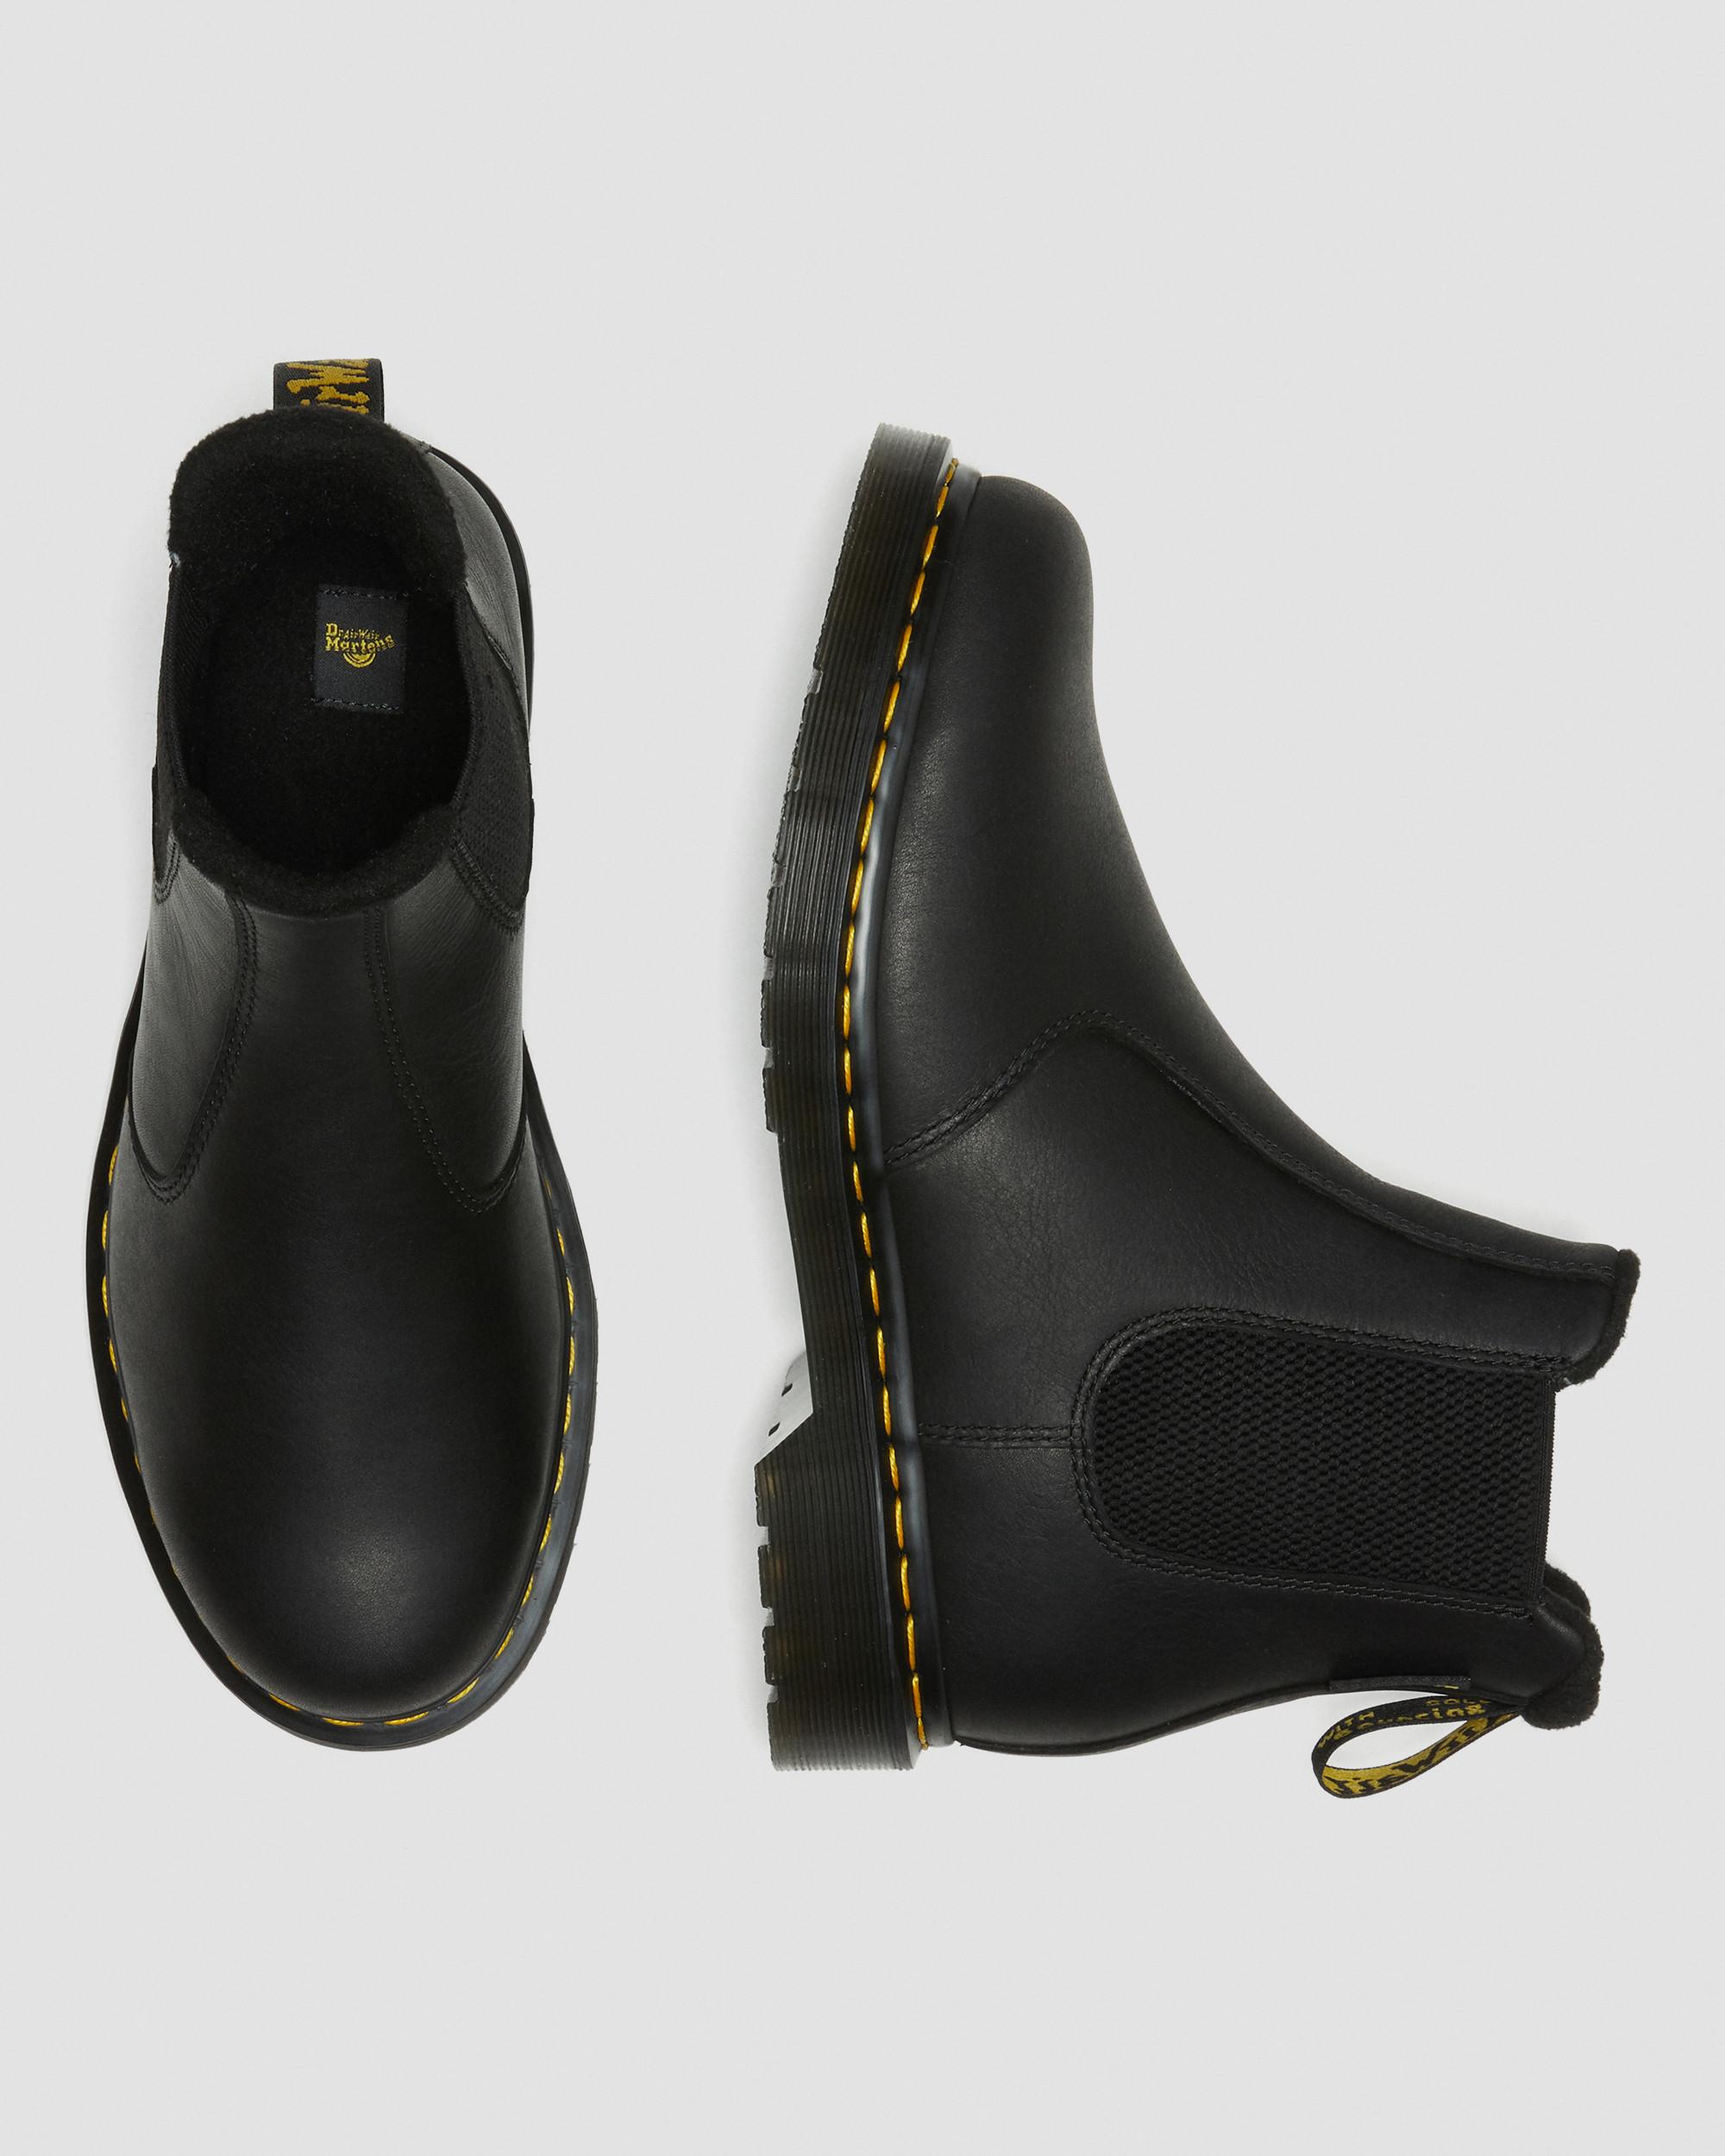 2976 Warmwair Valor WP Leather Chelsea Boots | Dr. Martens